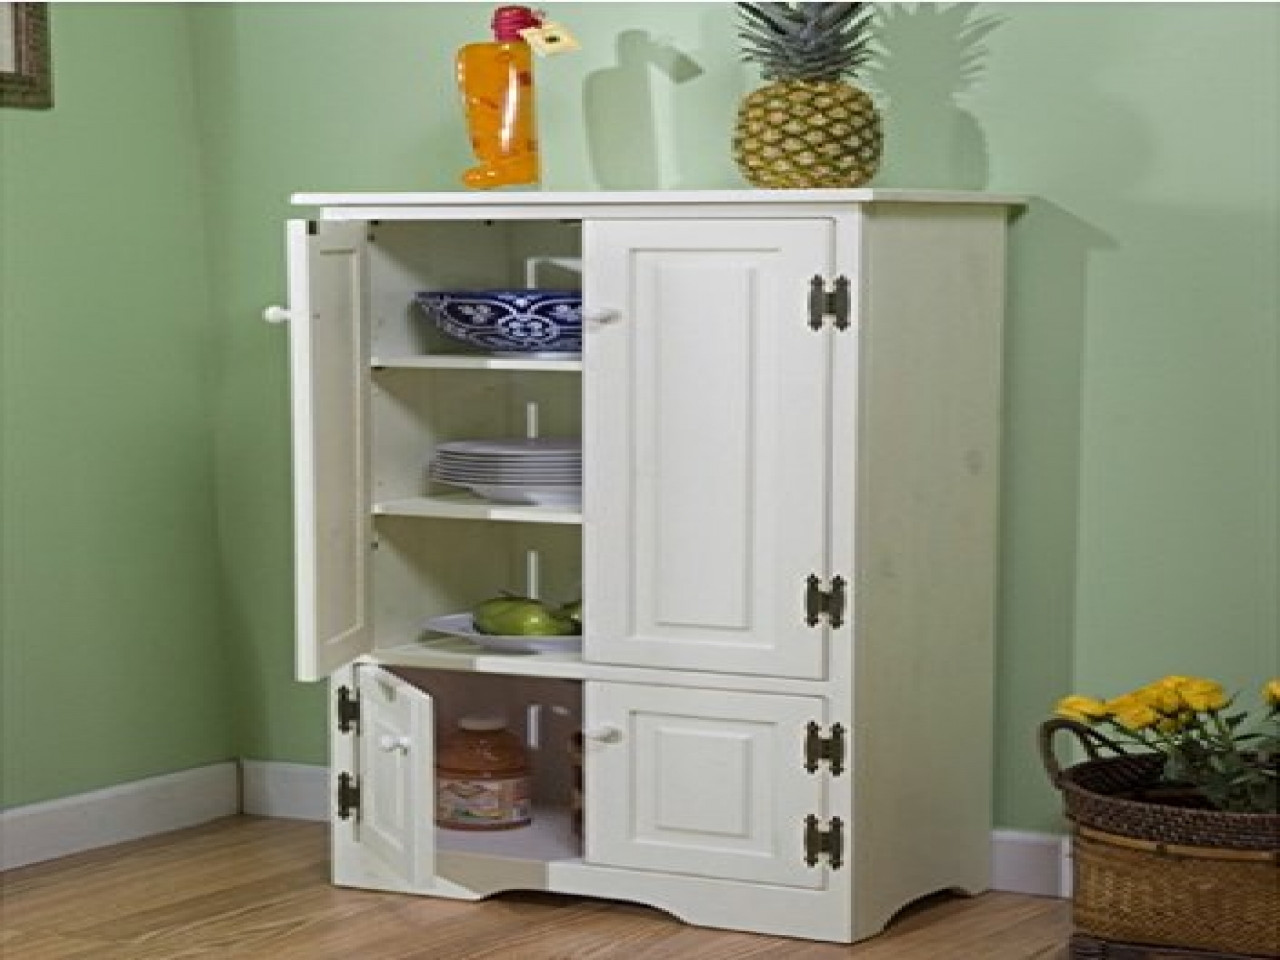 Home Depot Kitchen Storage
 Where to laundry room cabinets home depot kitchen